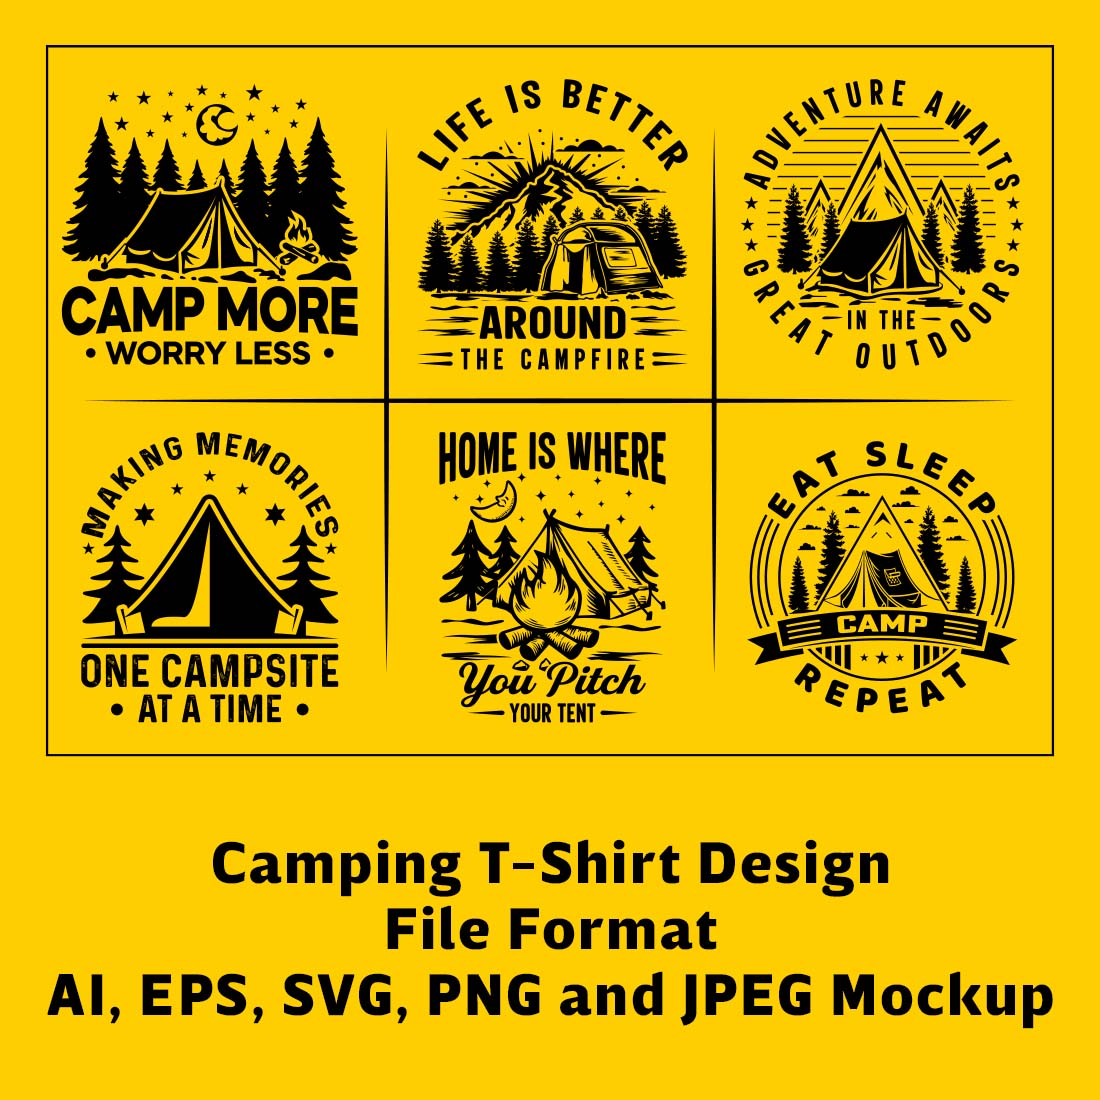 Camping t-shirt design preview image.